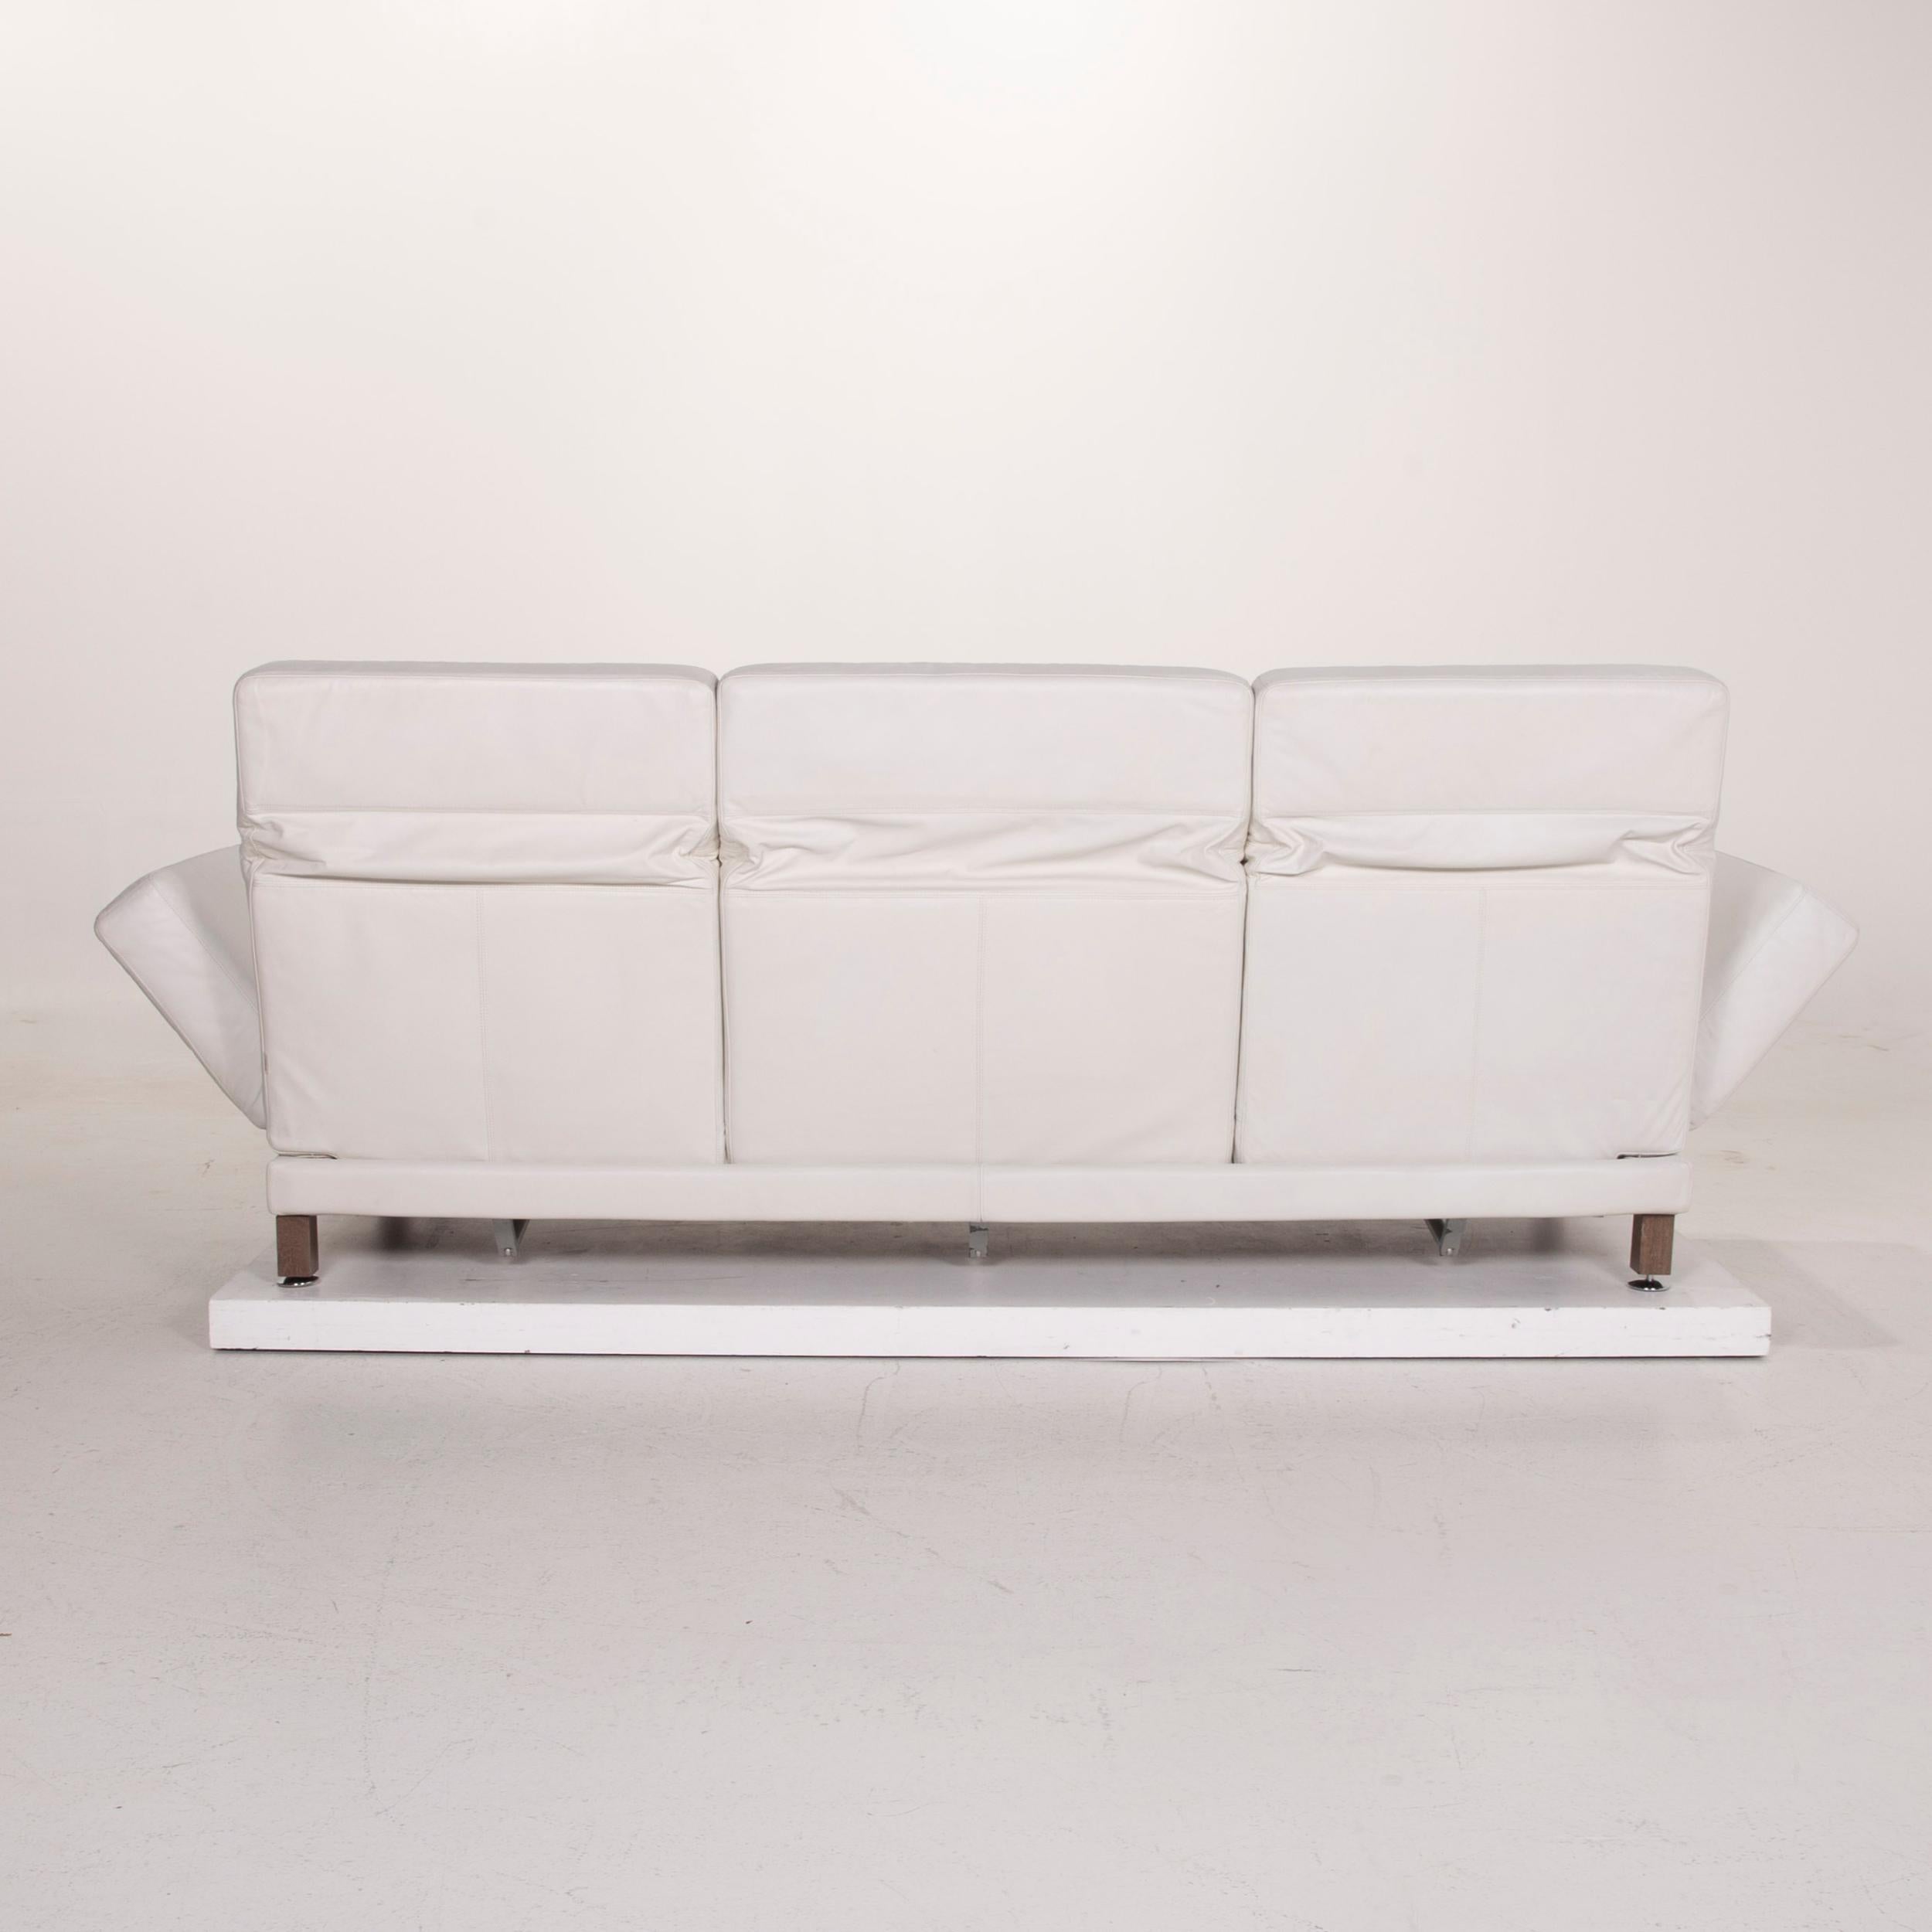 Brühl & Sippold Moule Leather Sofa Set White Three-Seat Relax Function Stool For Sale 11